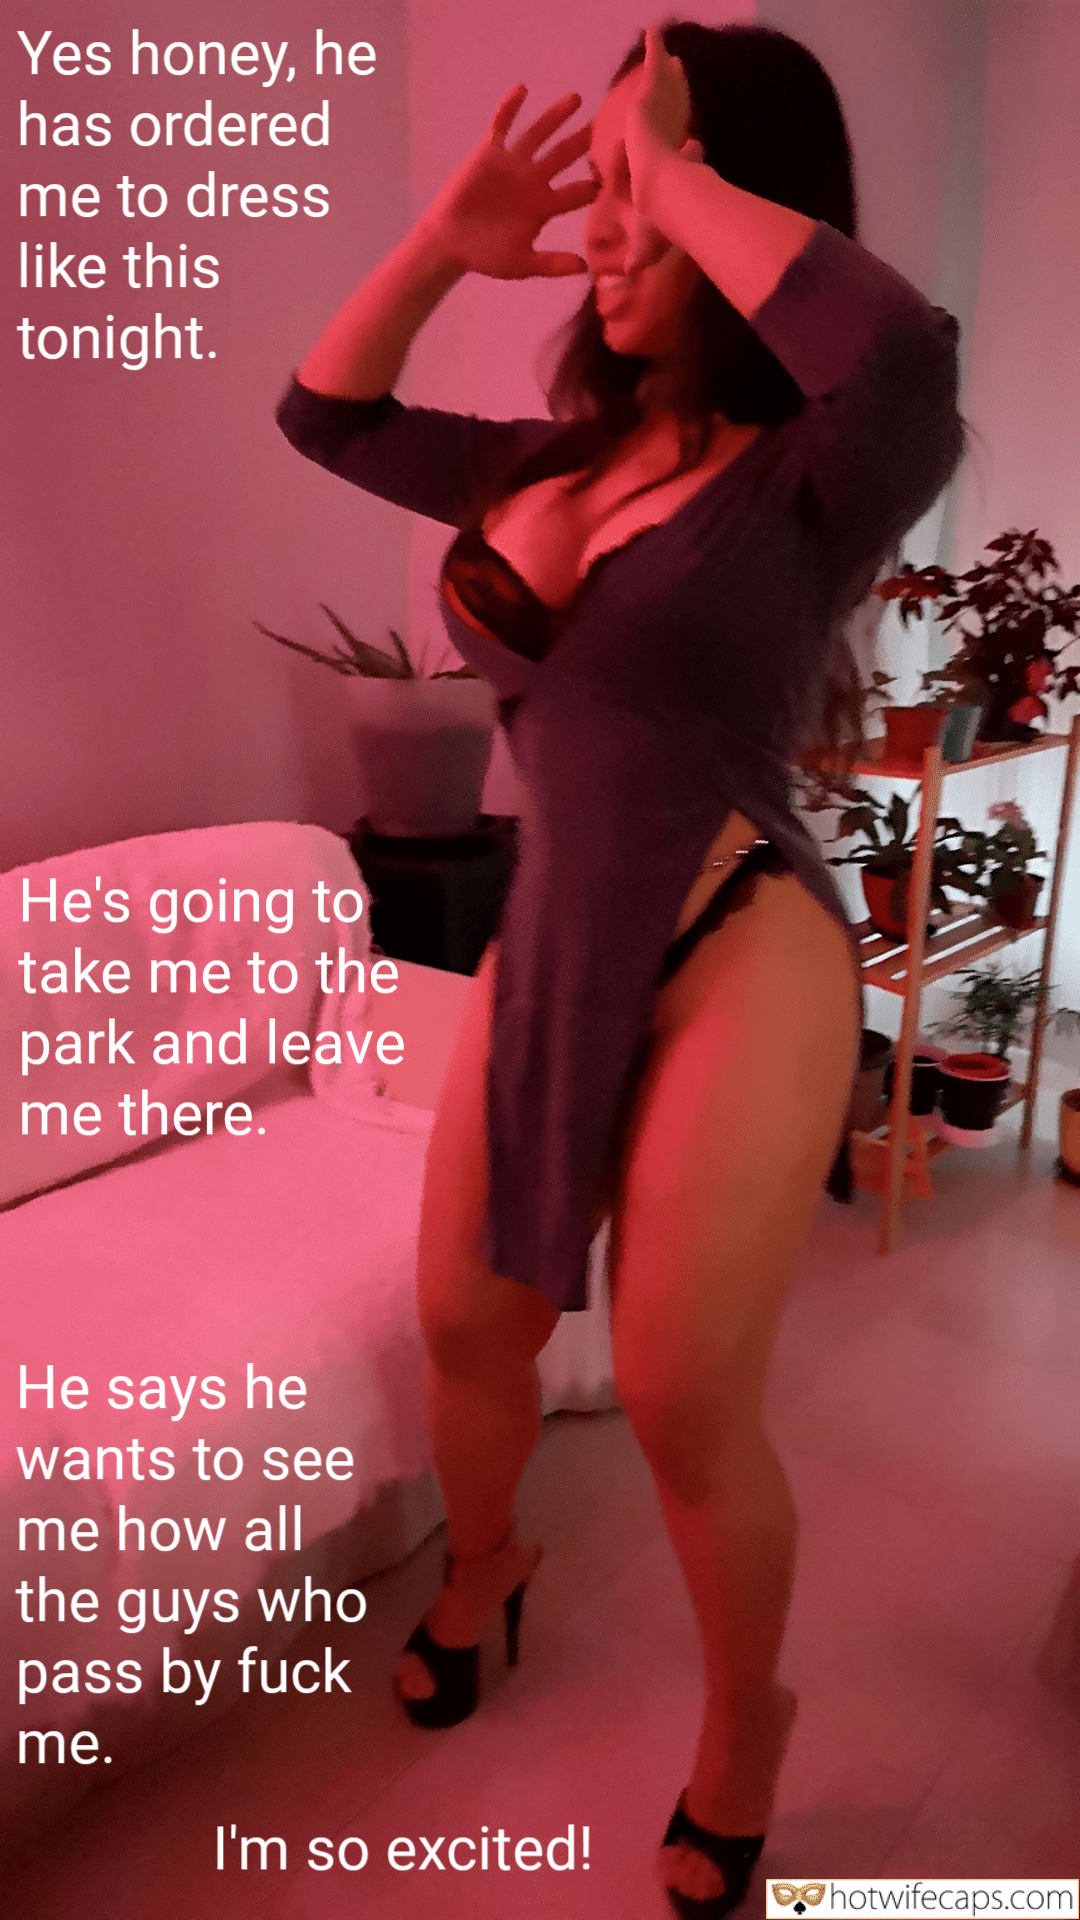 Bull, Challenges and Rules, Cheating, Cum Slut, Dogging, Getting Ready, Group Sex, Humiliation, Public, Wife Sharing Hotwife Caption №568674 Latina slutwife Tina Biwing pic